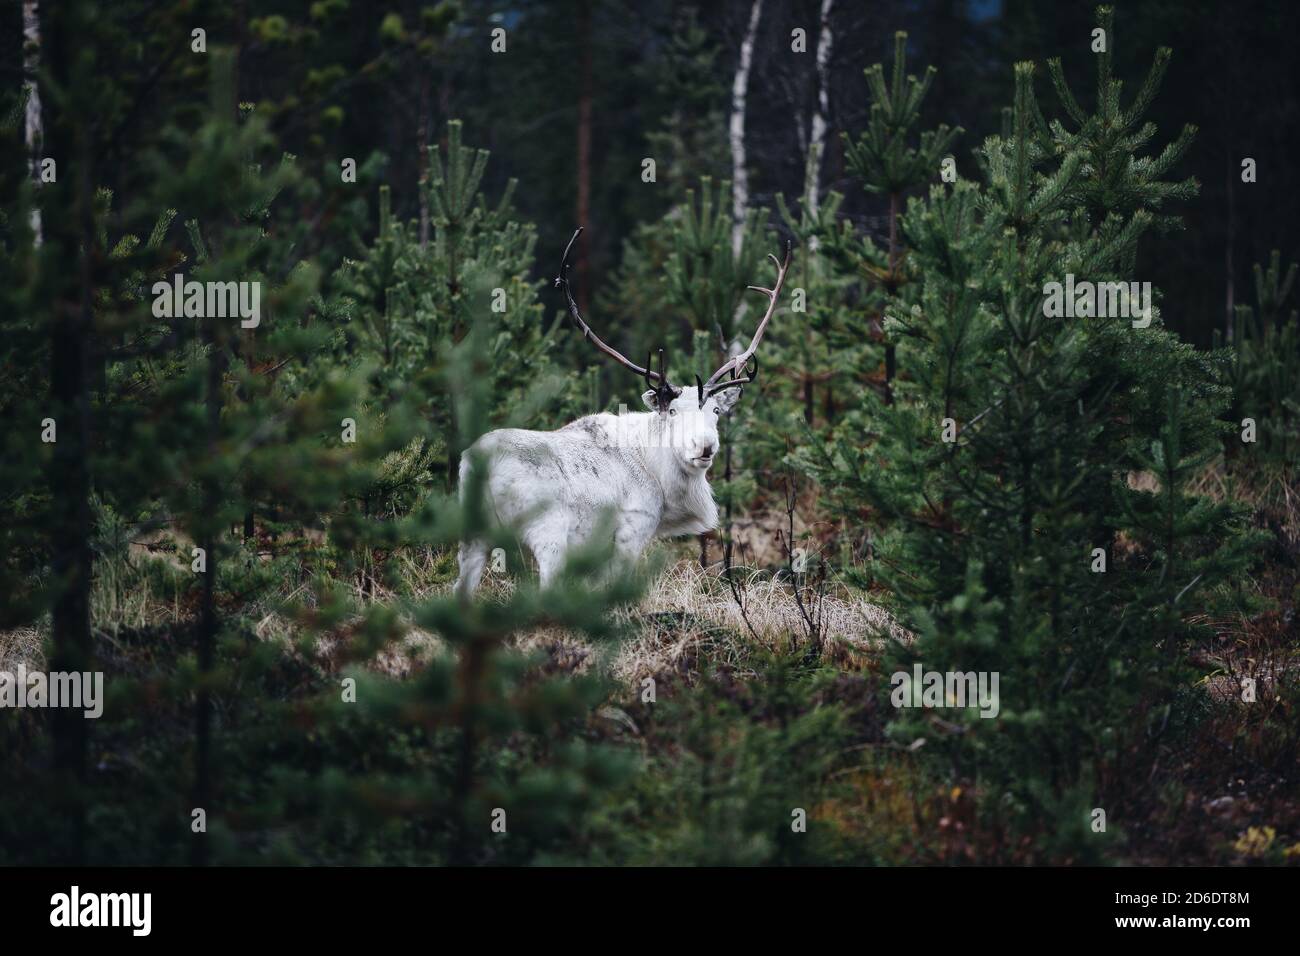 A white reindeer at autumn time in Lapland, Finland Stock Photo